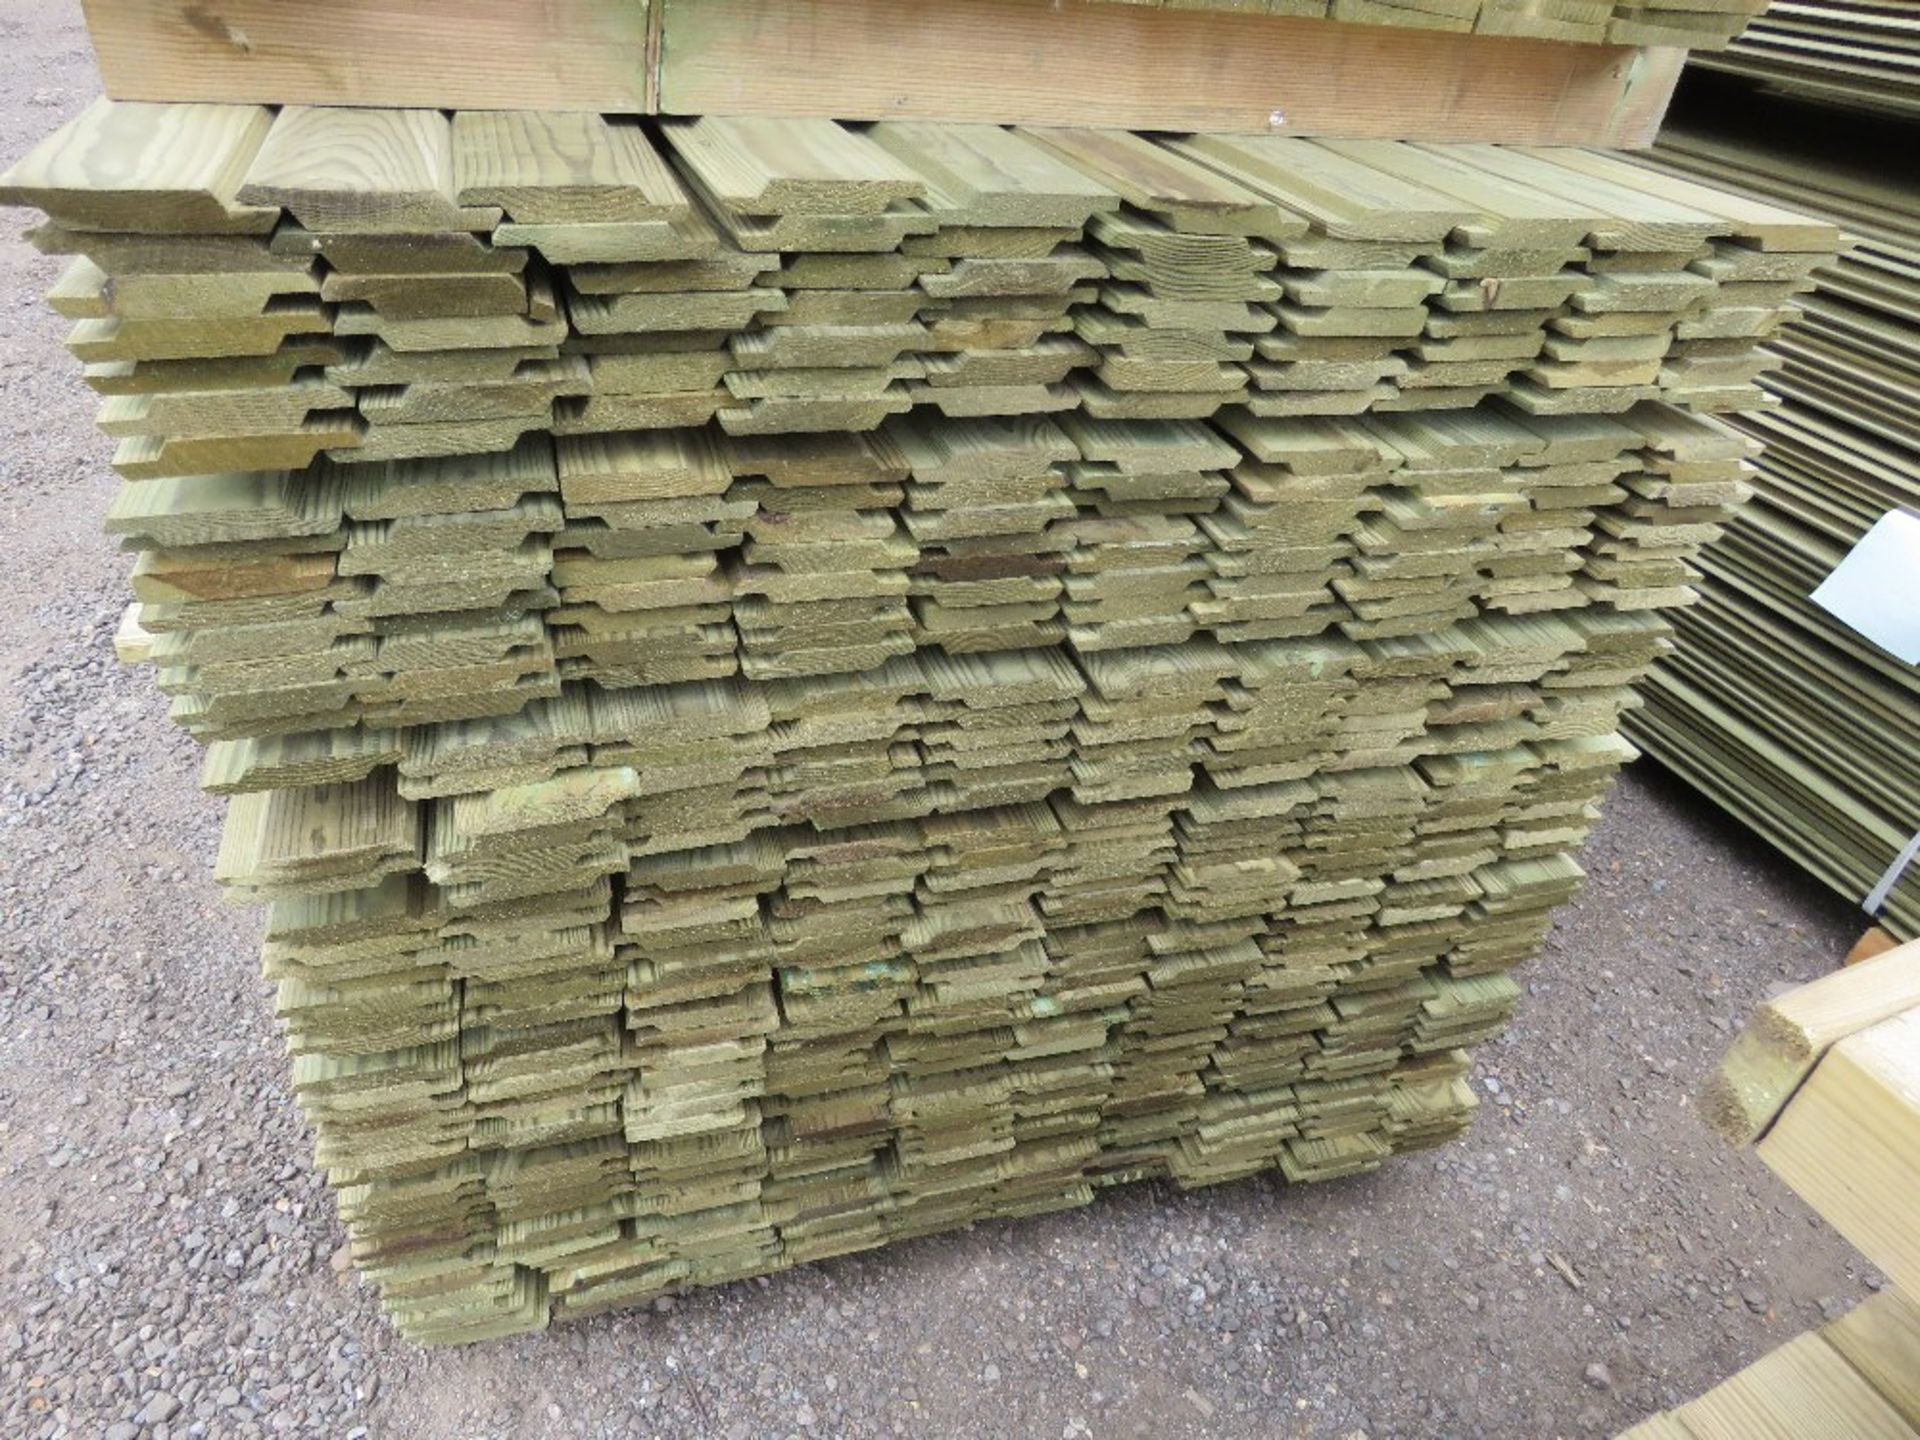 EXTRA LARGE PACK OF PRESSURE TREATED SHIPLAP FENCE CLADDING TIMBER BOARDS. 1.83M LENGTH X 100MM WIDT - Image 2 of 3